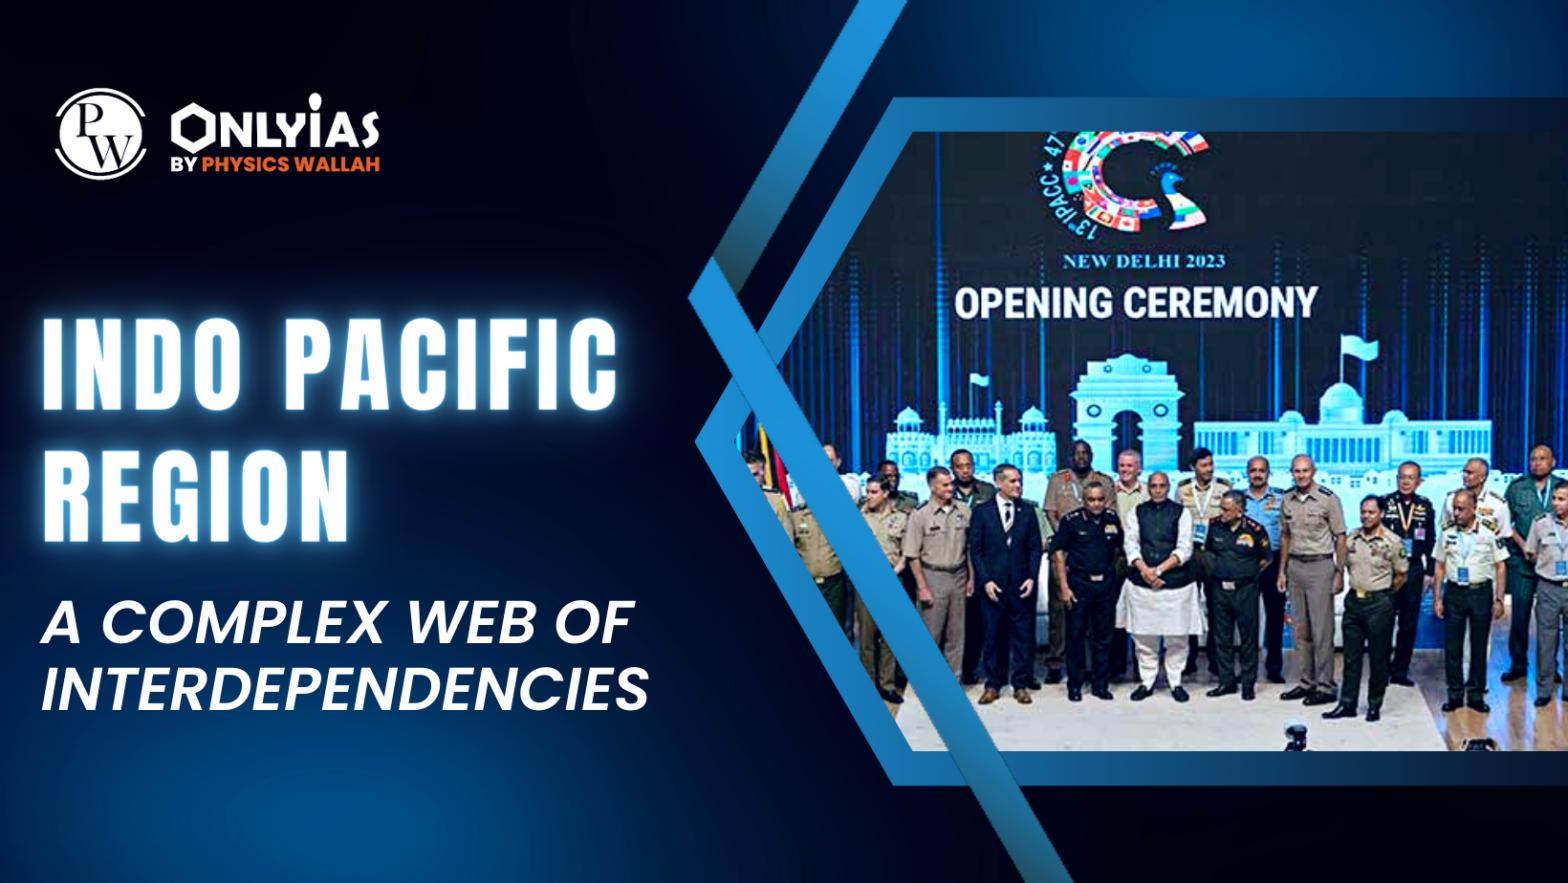 Indo Pacific Region: A Complex Web of Interdependencies | PWonlyIAS